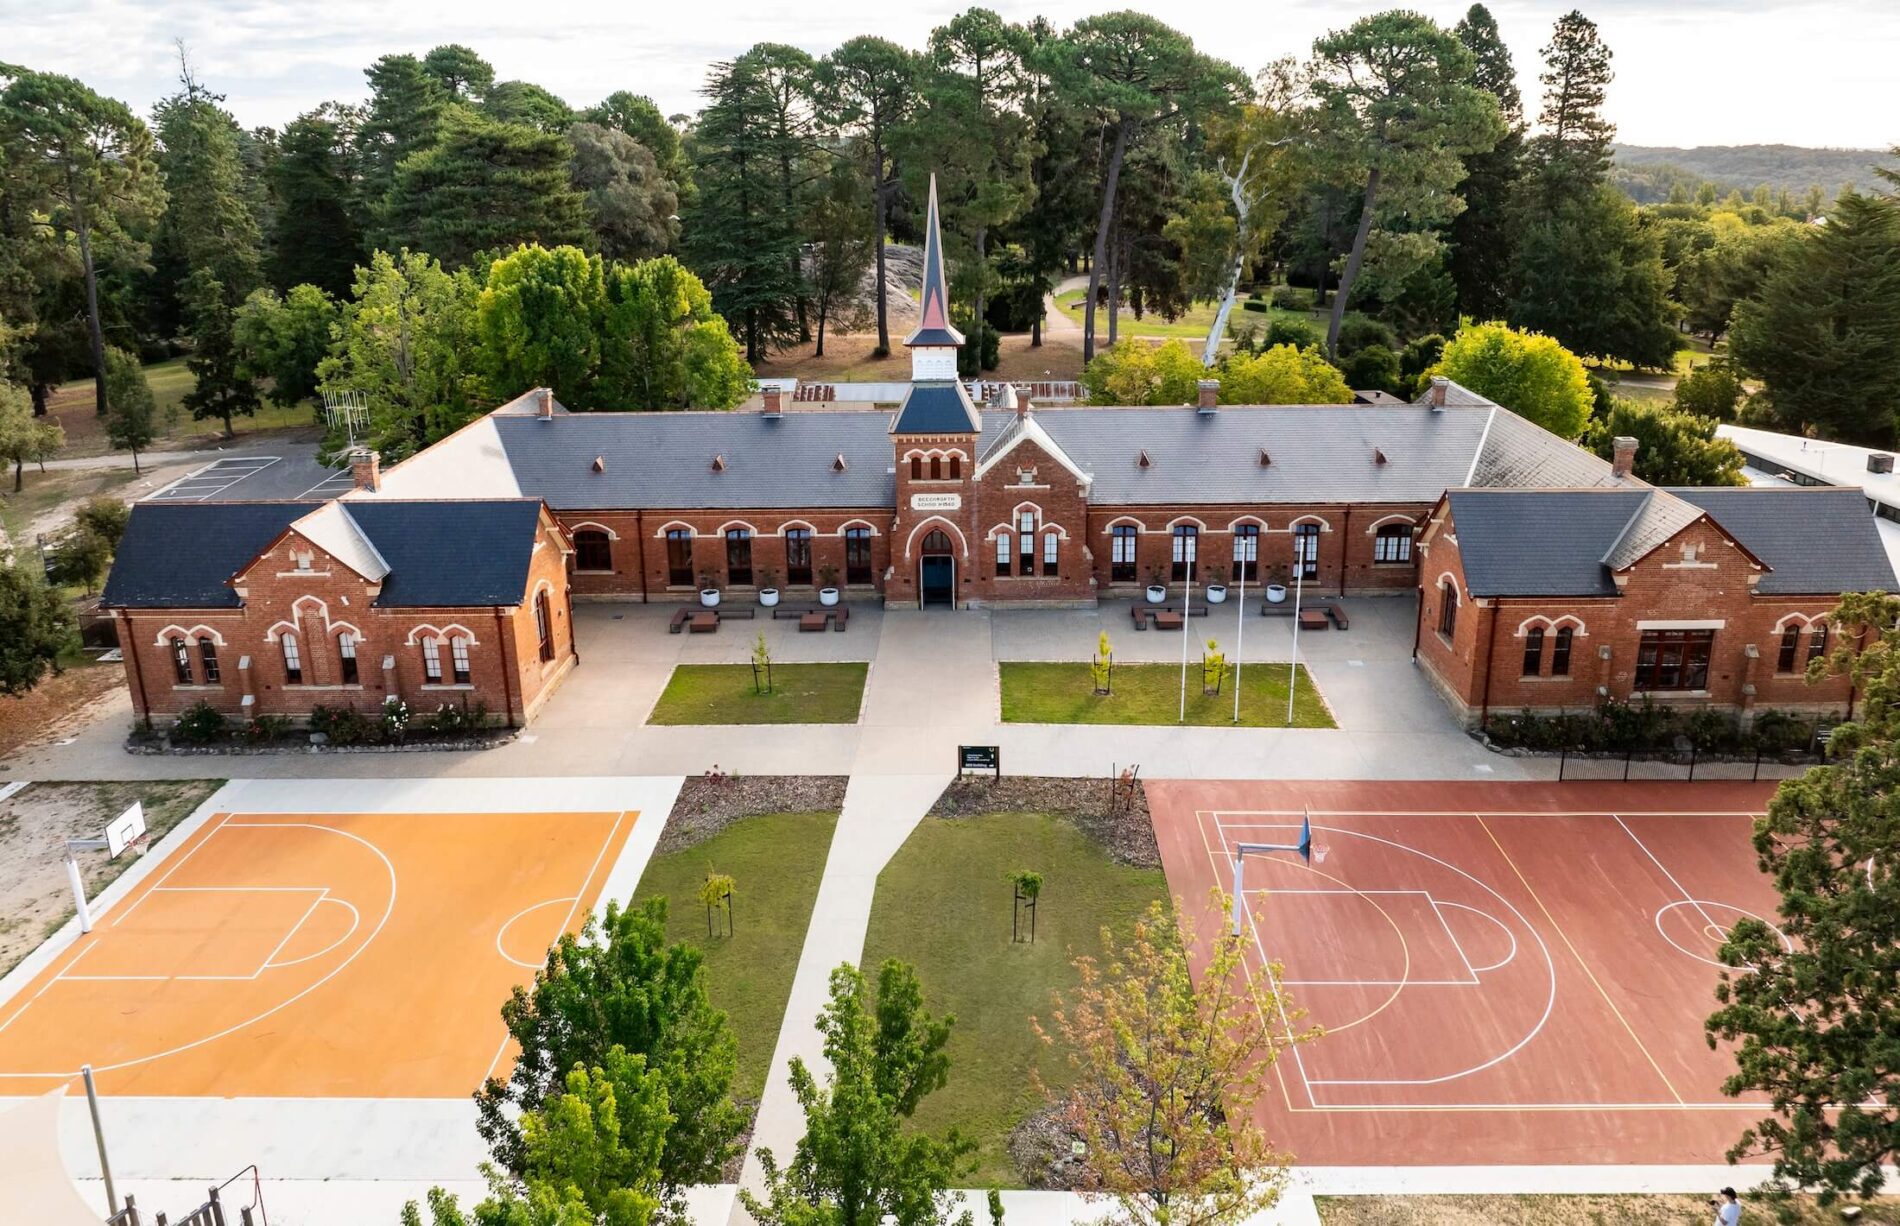 Aerial view of horseshoe shaped heritage brick school building with central spire, grassed and sports surfaced forecourt